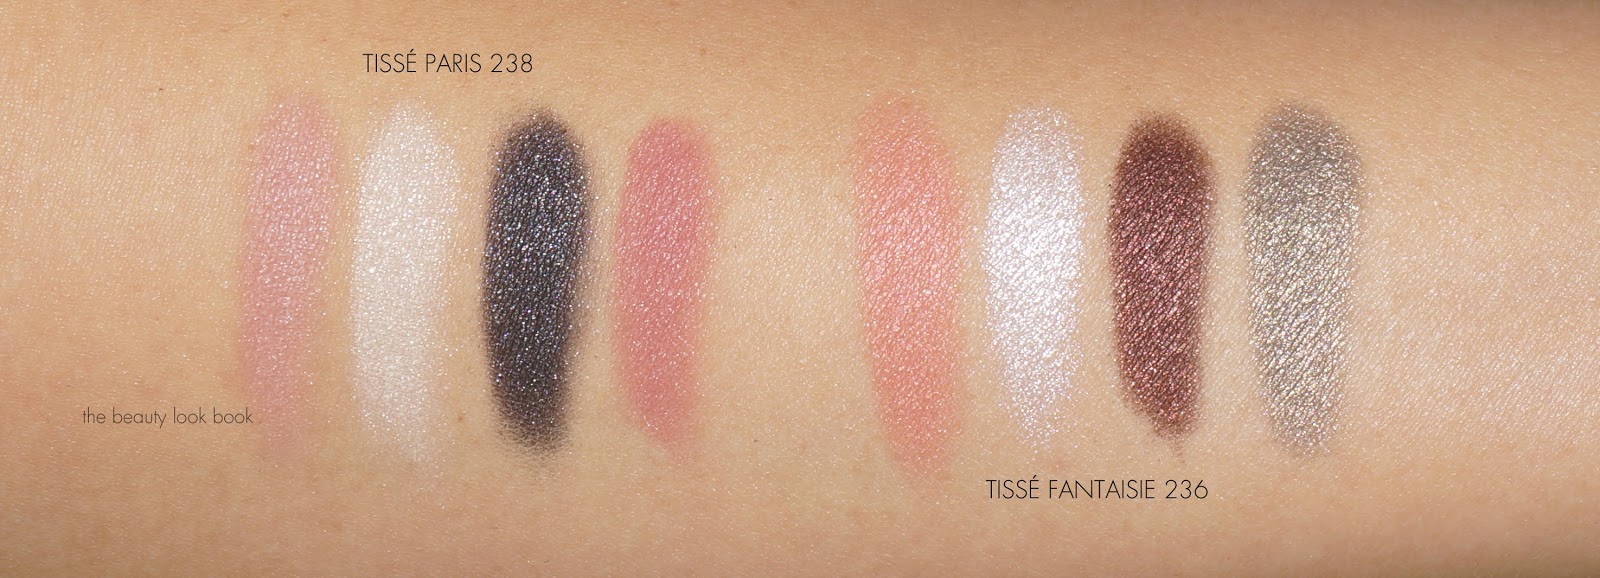 Swatches of the new Chanel Les 4 Ombres ft. Tisse Gabrielle